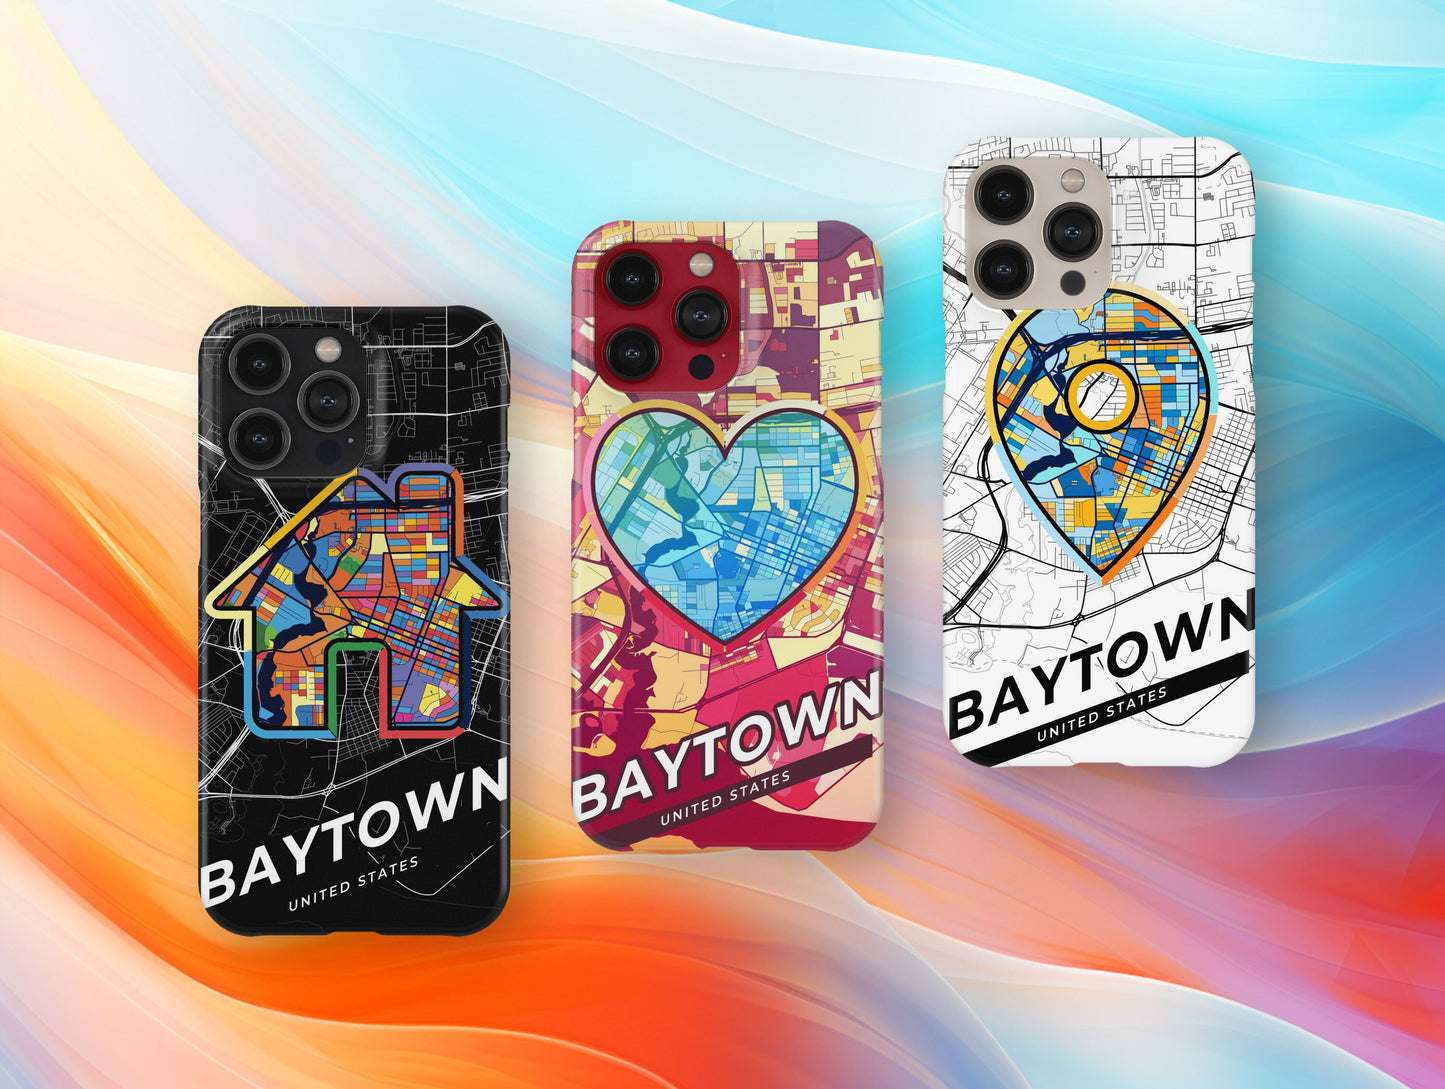 Baytown Texas slim phone case with colorful icon. Birthday, wedding or housewarming gift. Couple match cases.